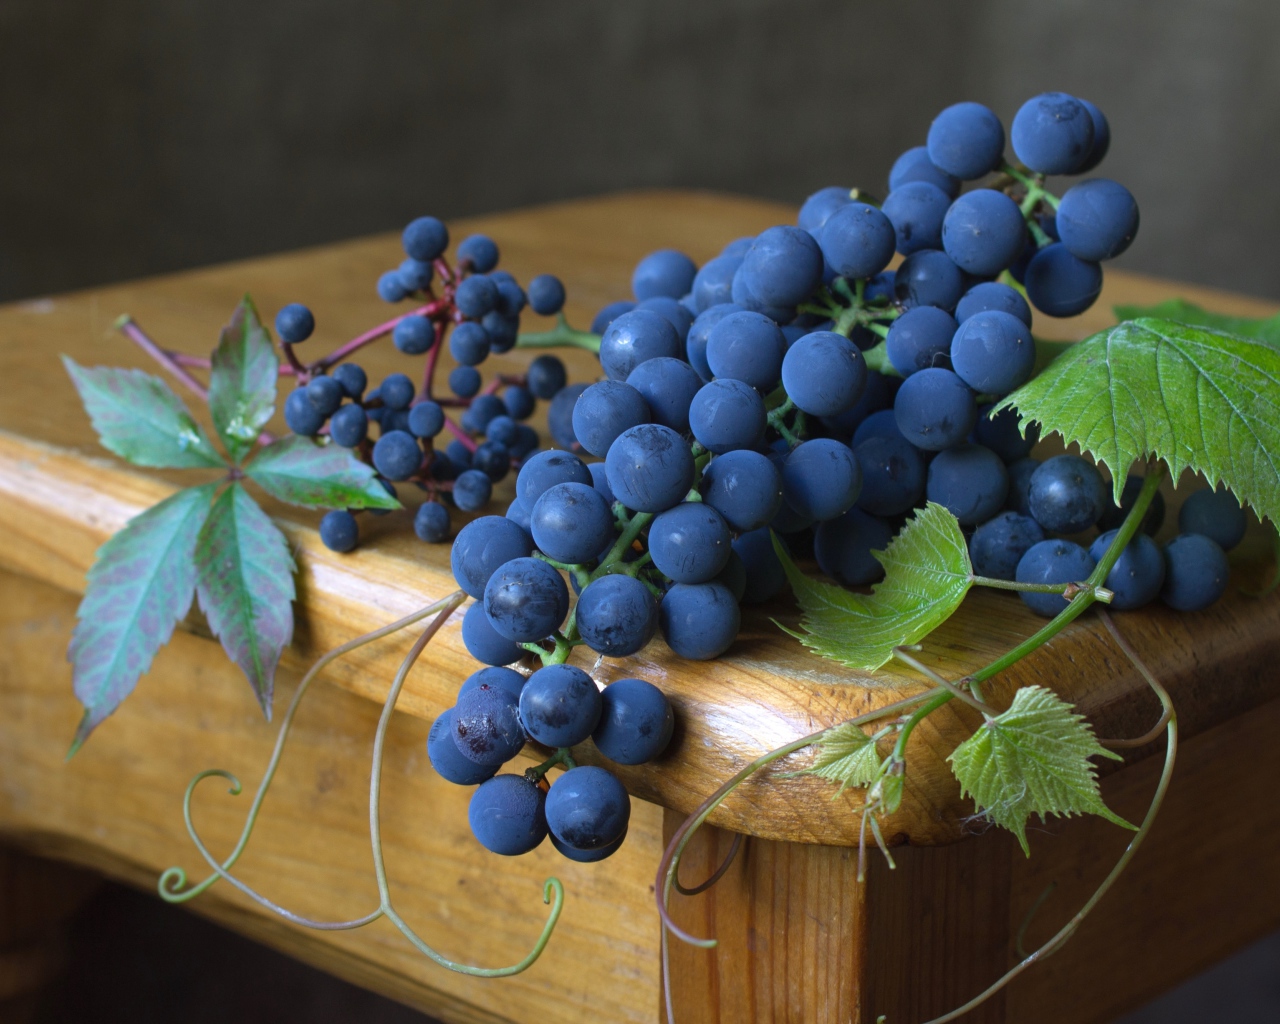 Blue grapes with green leaves lie on a wooden table